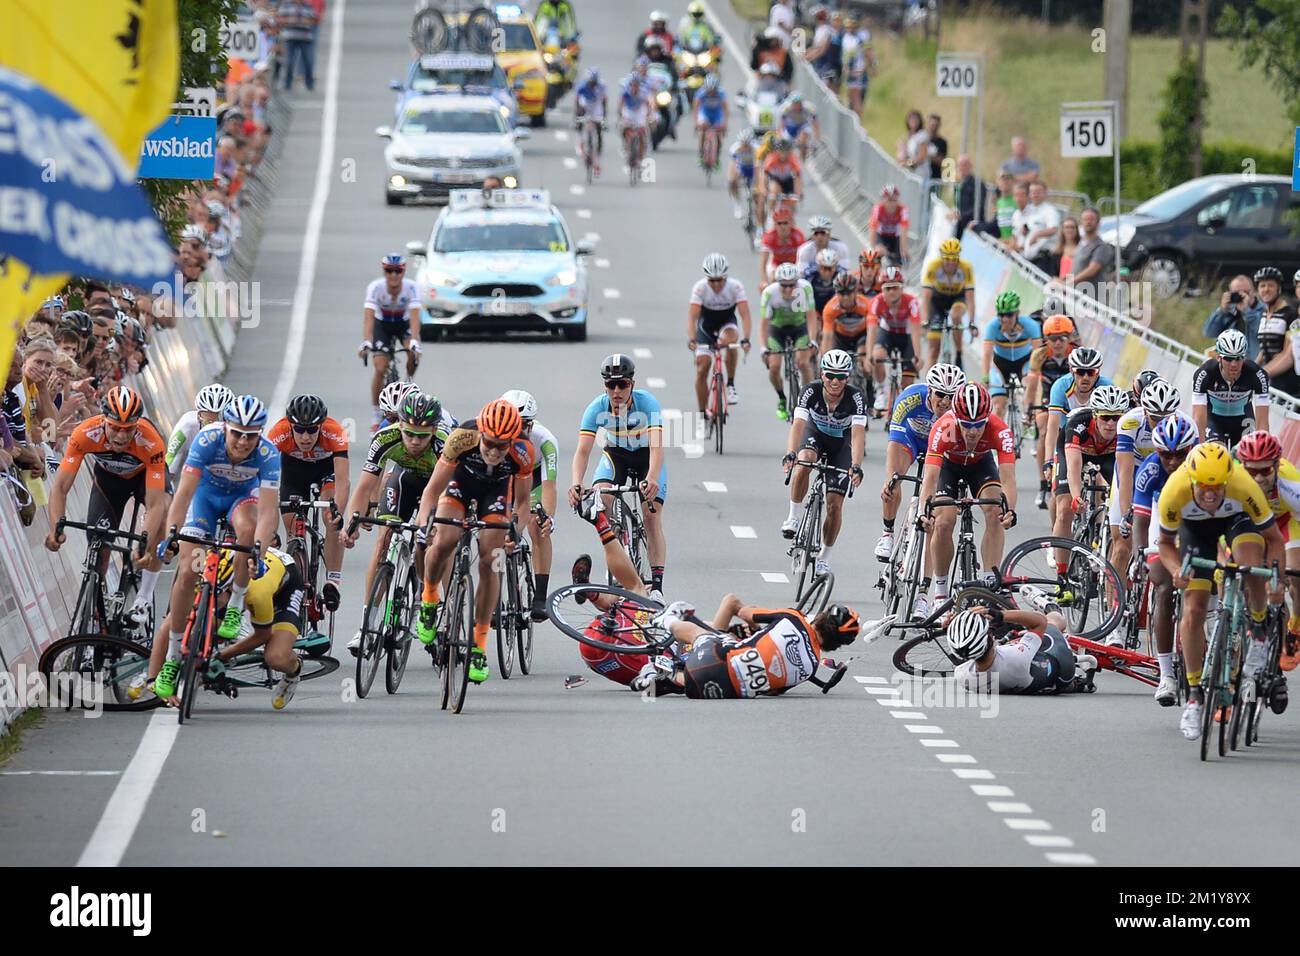 20150624 - INGOOIGEM, BELGIUM: Illustration picture shows multiple cyclists falling in the final meters of the 68th edition of the Halle-Ingooigem cycling race, UCI 1,1 race of 198.8 km from Halle to Ingooigem, Wednesday 24 June 2015. BELGA PHOTO DAVID STOCKMAN Stock Photo